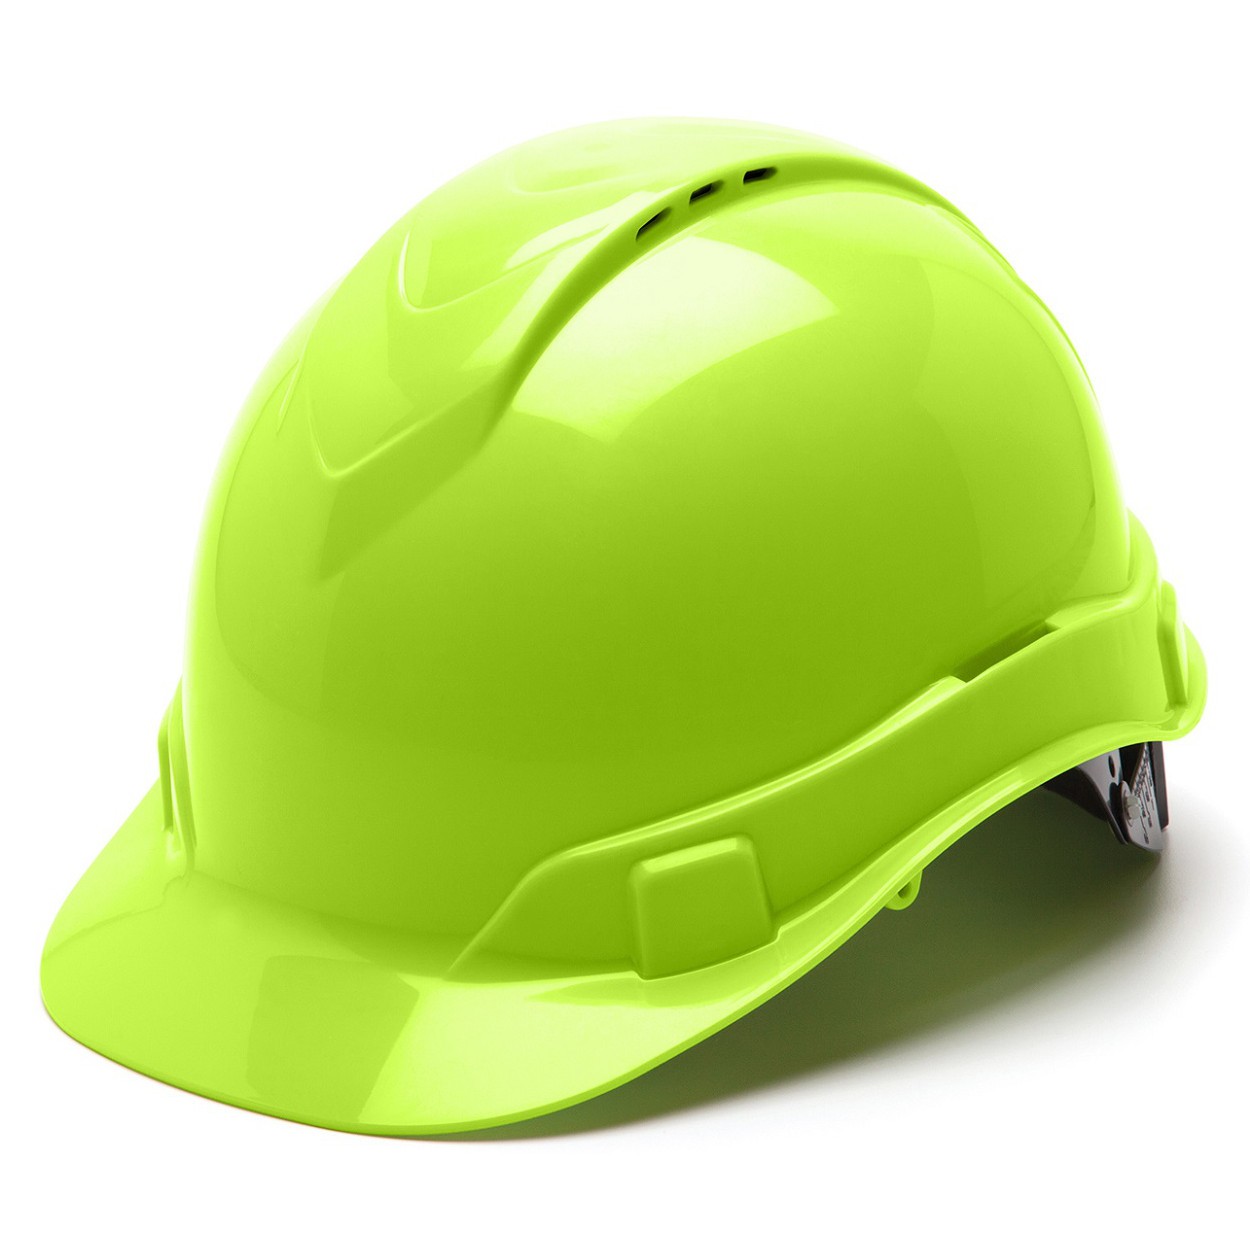 Pyramex Ridgeline Vented Cap Style Hard Hat with 4 Point Ratchet Suspension from Columbia Safety